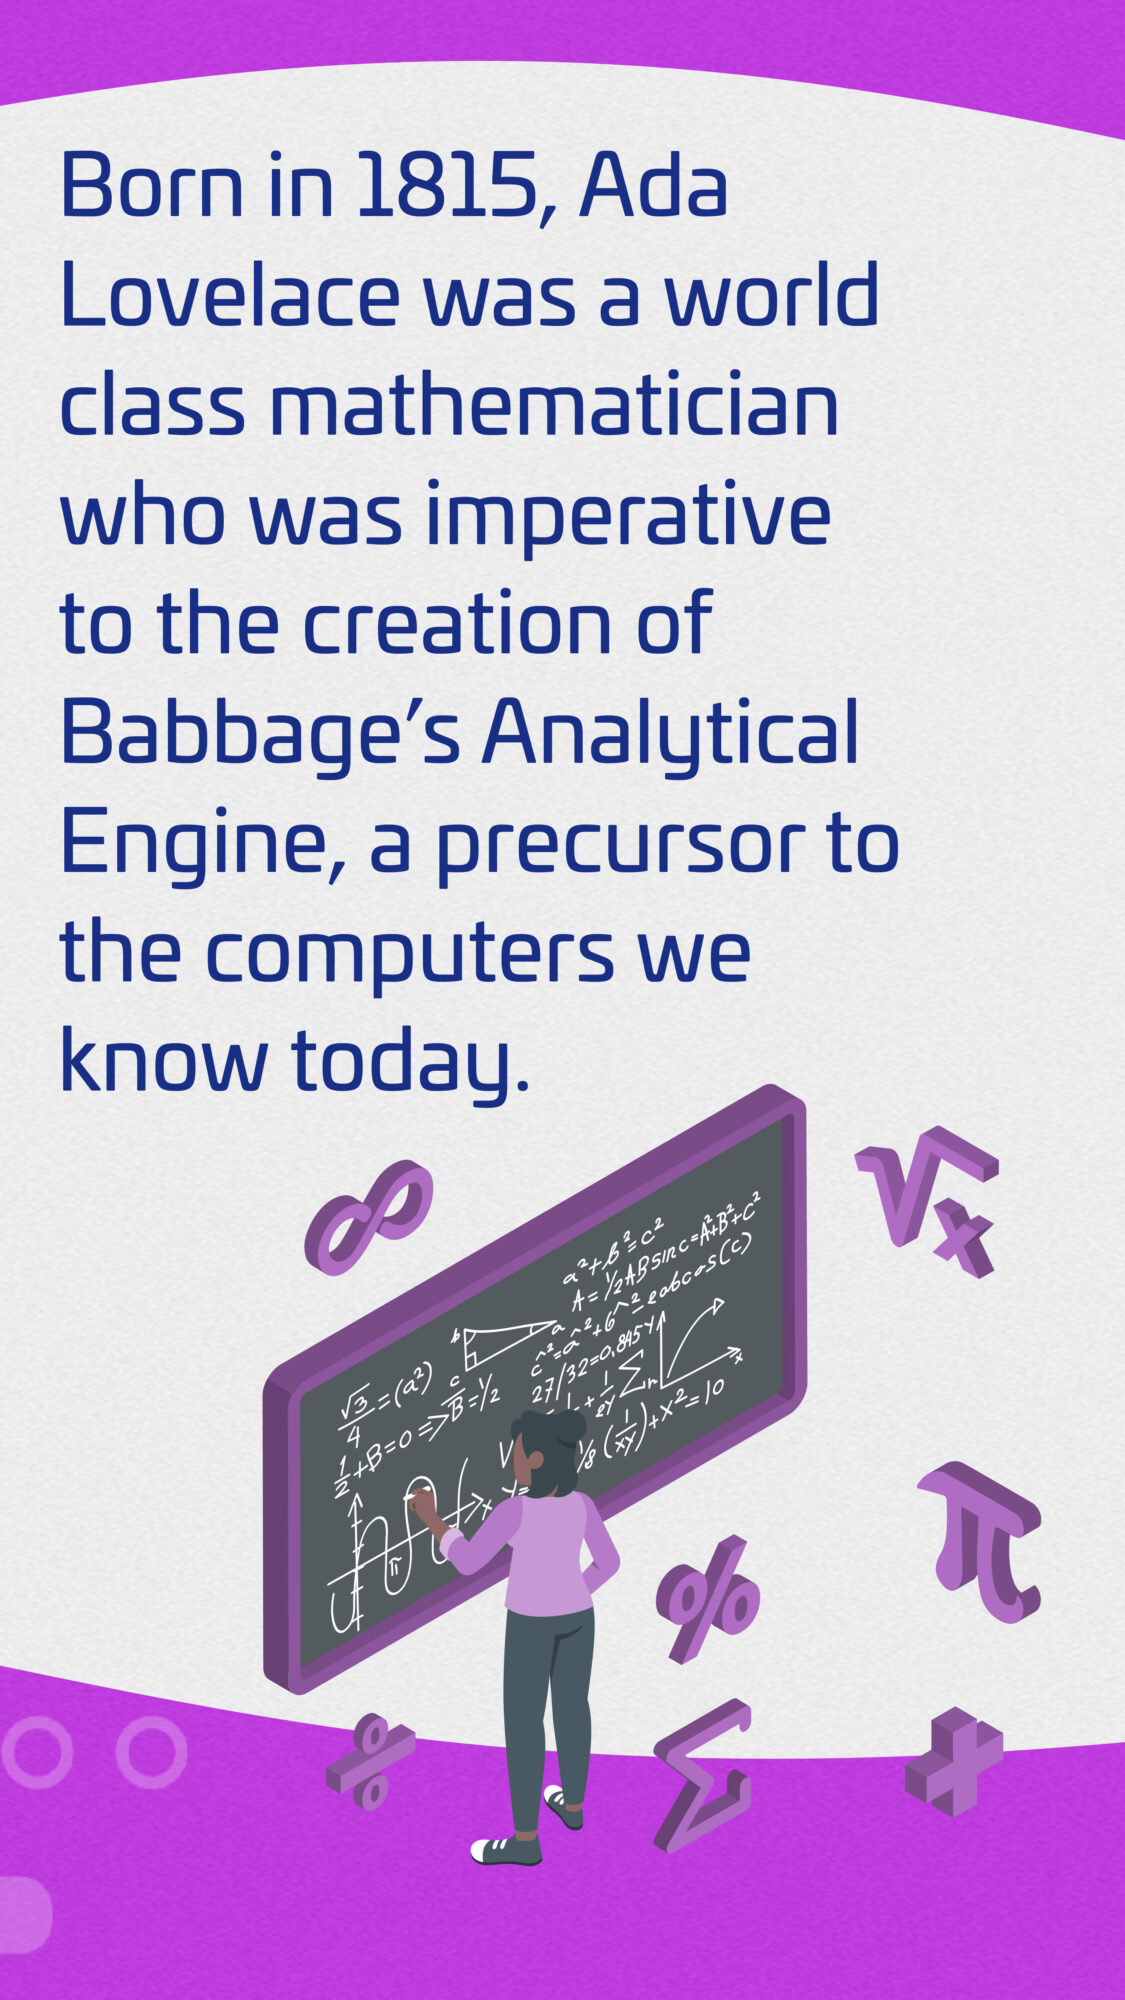 An infographic on Asa Lovelace. 'Born in 1815, Ada Lovelace was a world-class mathematician who was imperative to the creation of Babbage's Analytical Engine, a precursor to the computers we know today'.